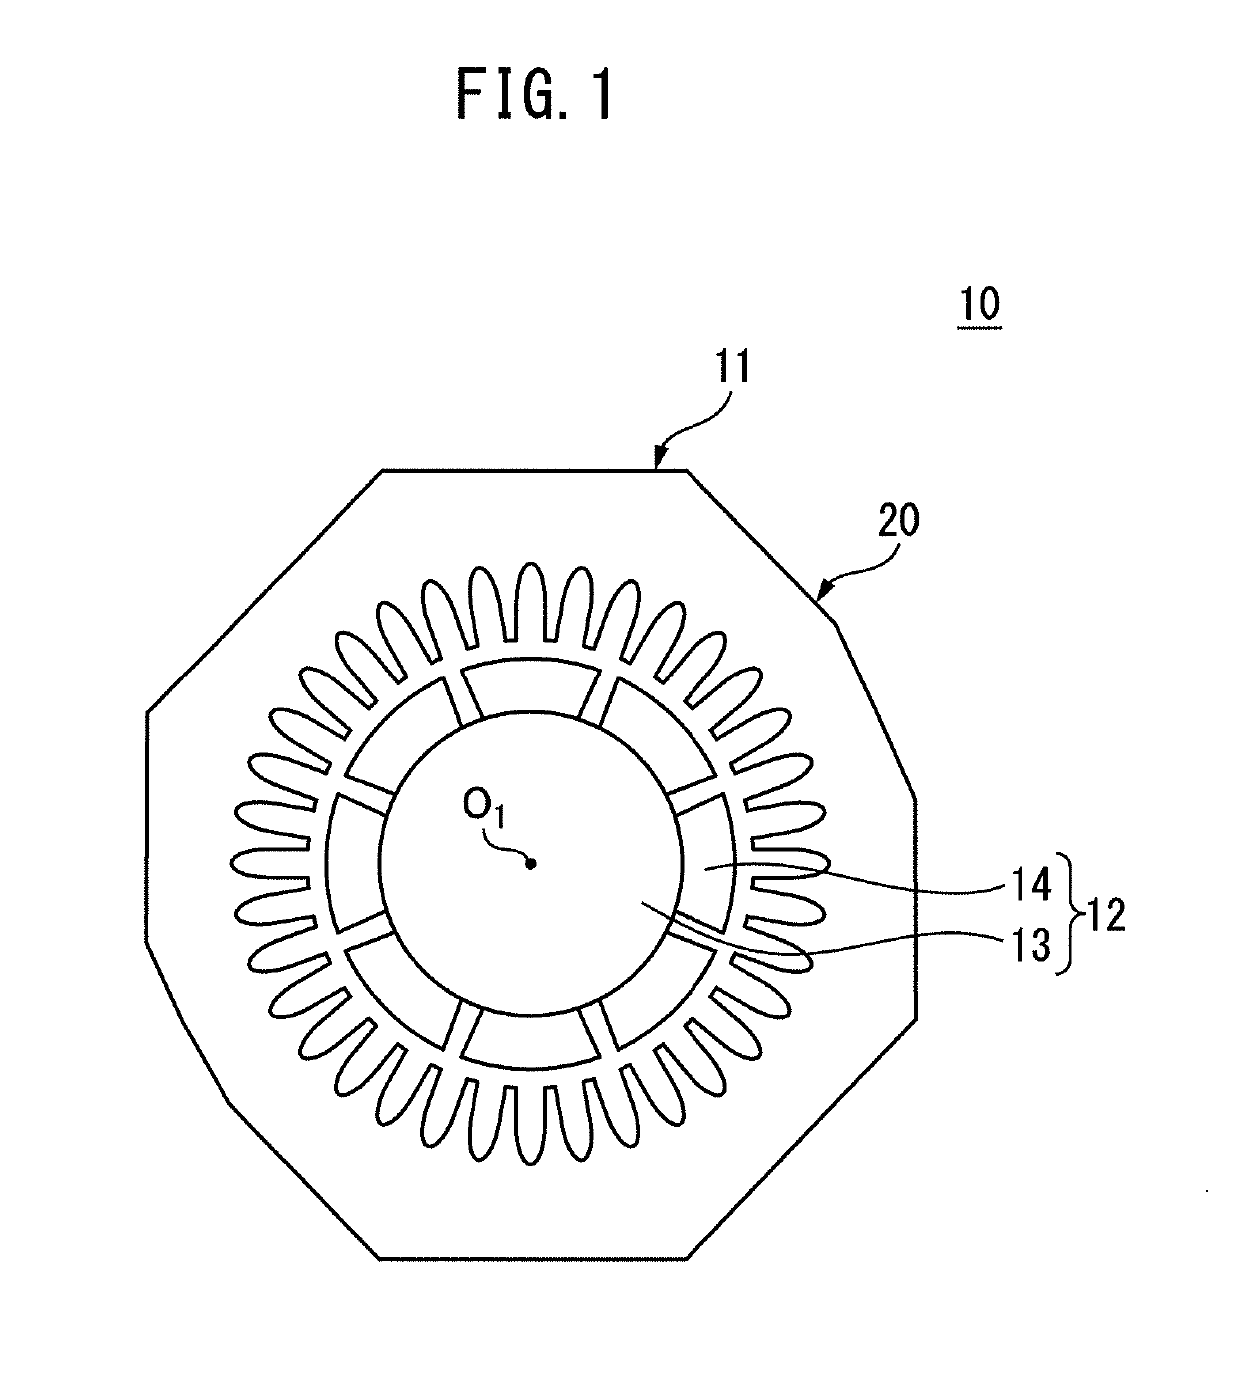 Motor provided with noncircular stator core, apparatus for production of motor, and method for production of motor